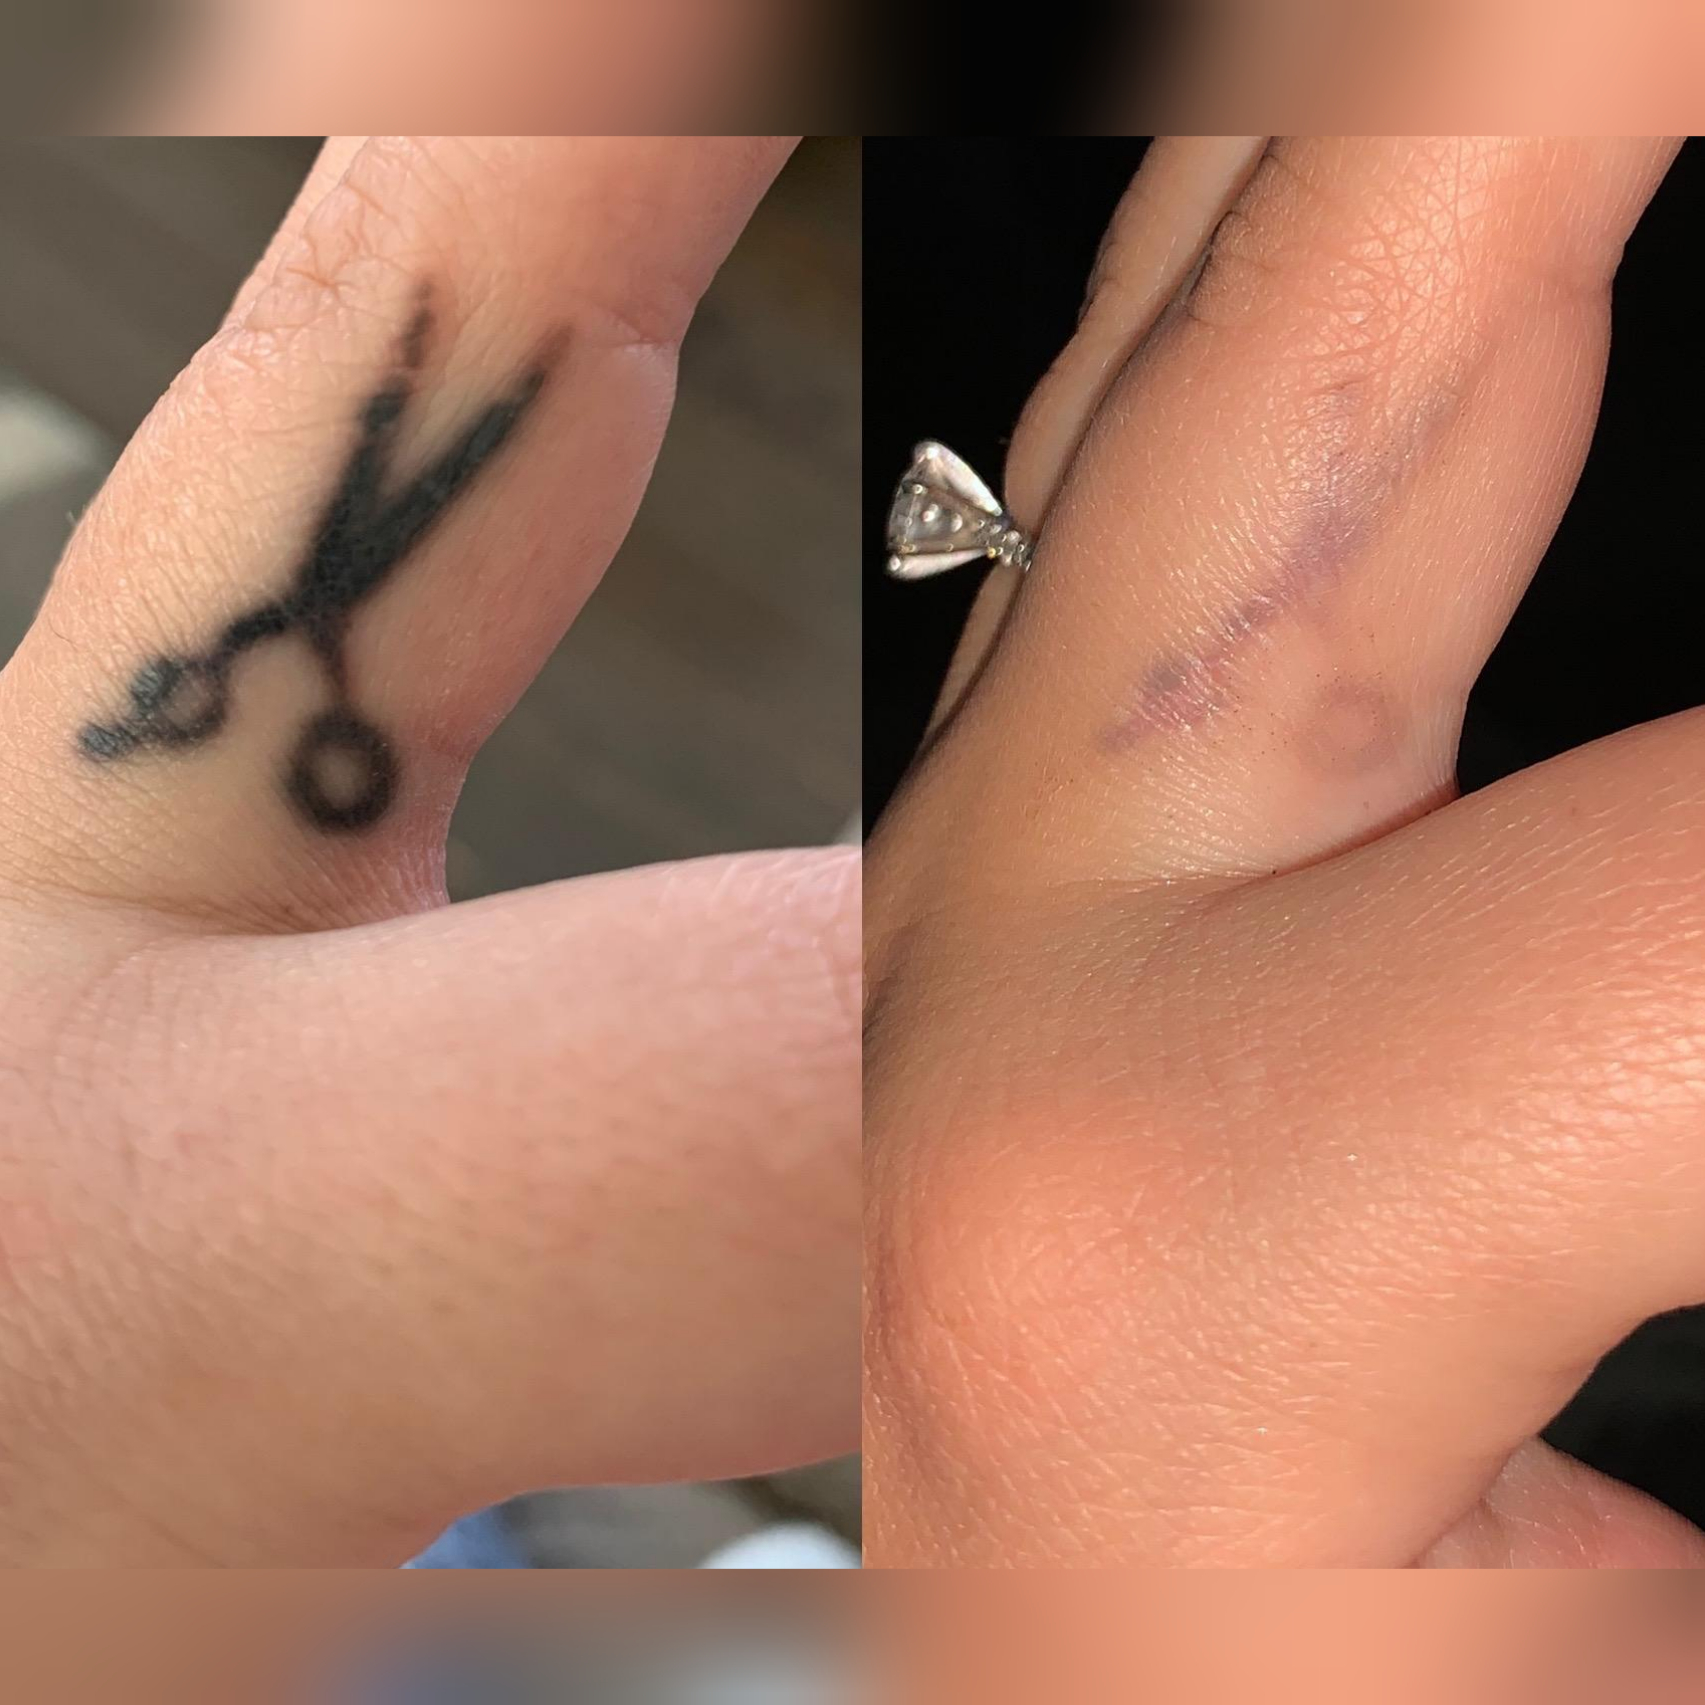 Hand and finger tattoos can be unpredictable. But these are amazing results  after 3 sessions!! Evolve Tattoo Removal 2504 State St San D... | Instagram